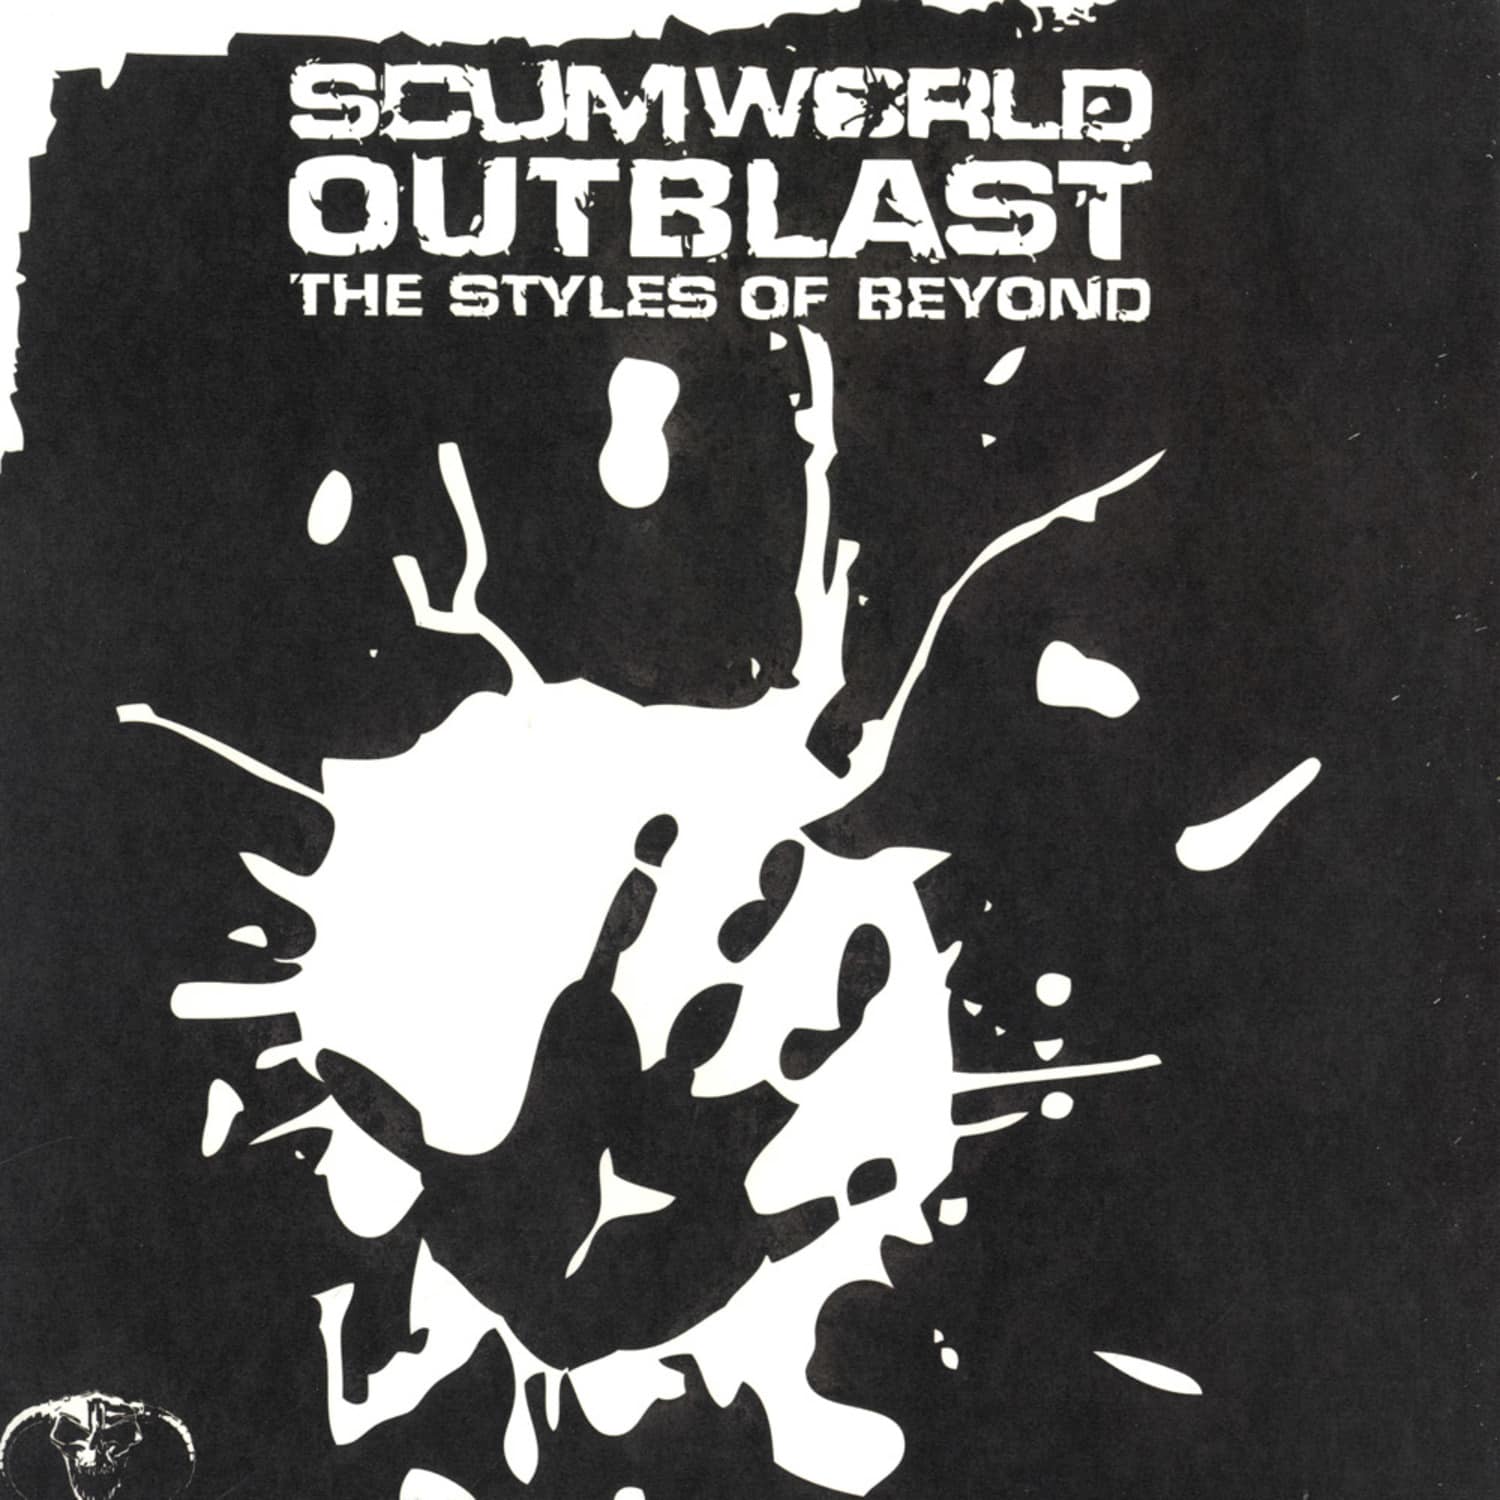 Outblast - SCUMWORLD / THE STYLES OF BEYOND